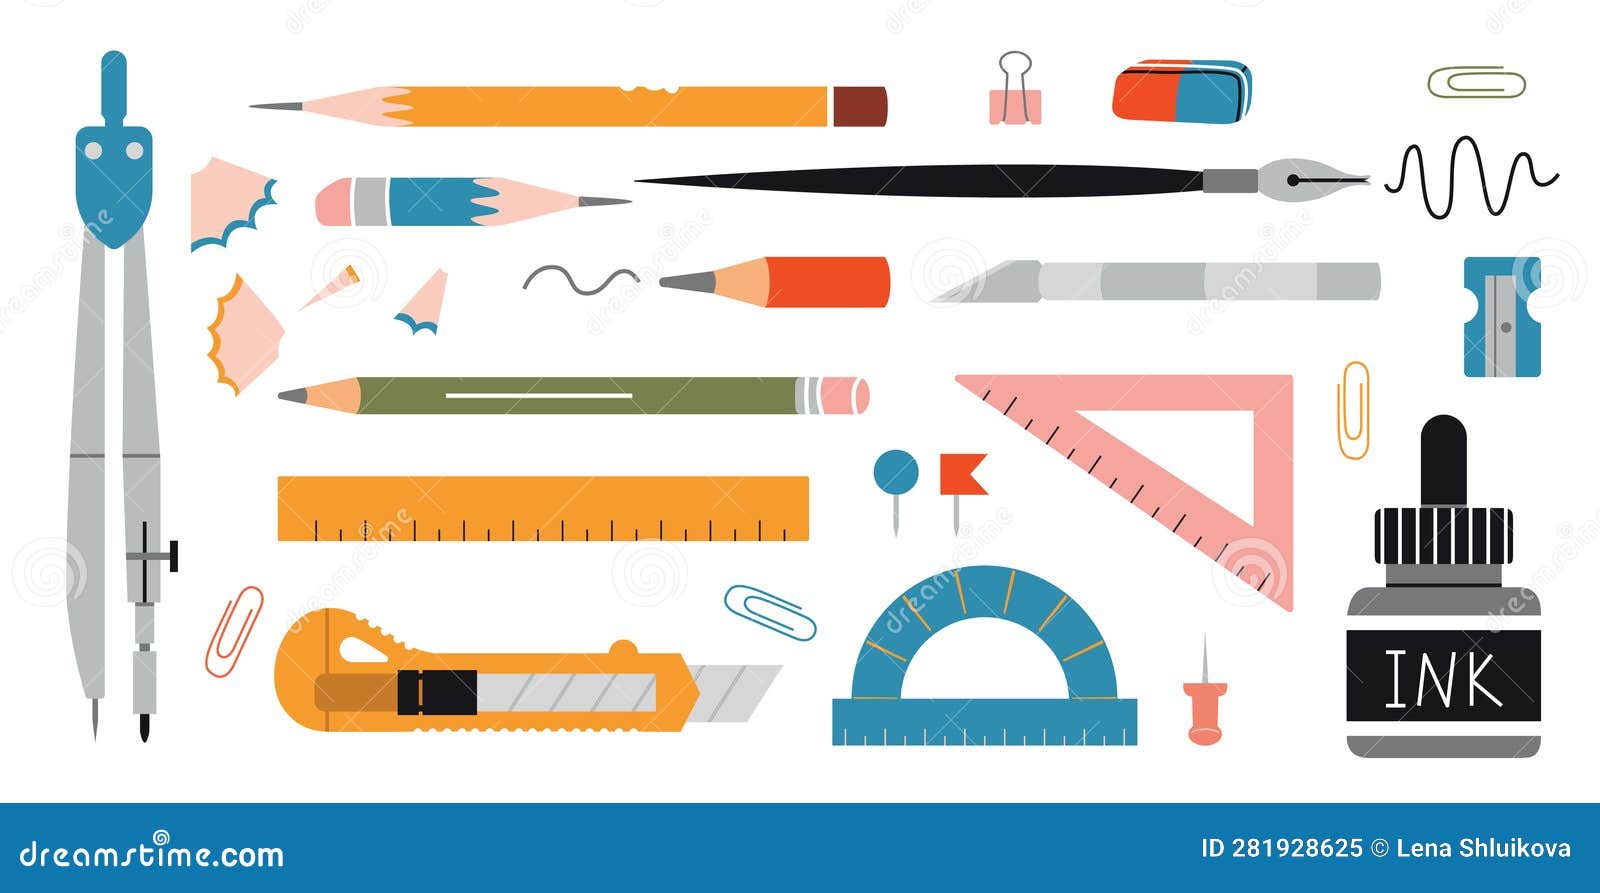 https://thumbs.dreamstime.com/z/drawing-graphics-tools-set-cartoon-style-mechanical-supplies-like-compasses-ruler-pencils-trendy-modern-vector-illustration-281928625.jpg